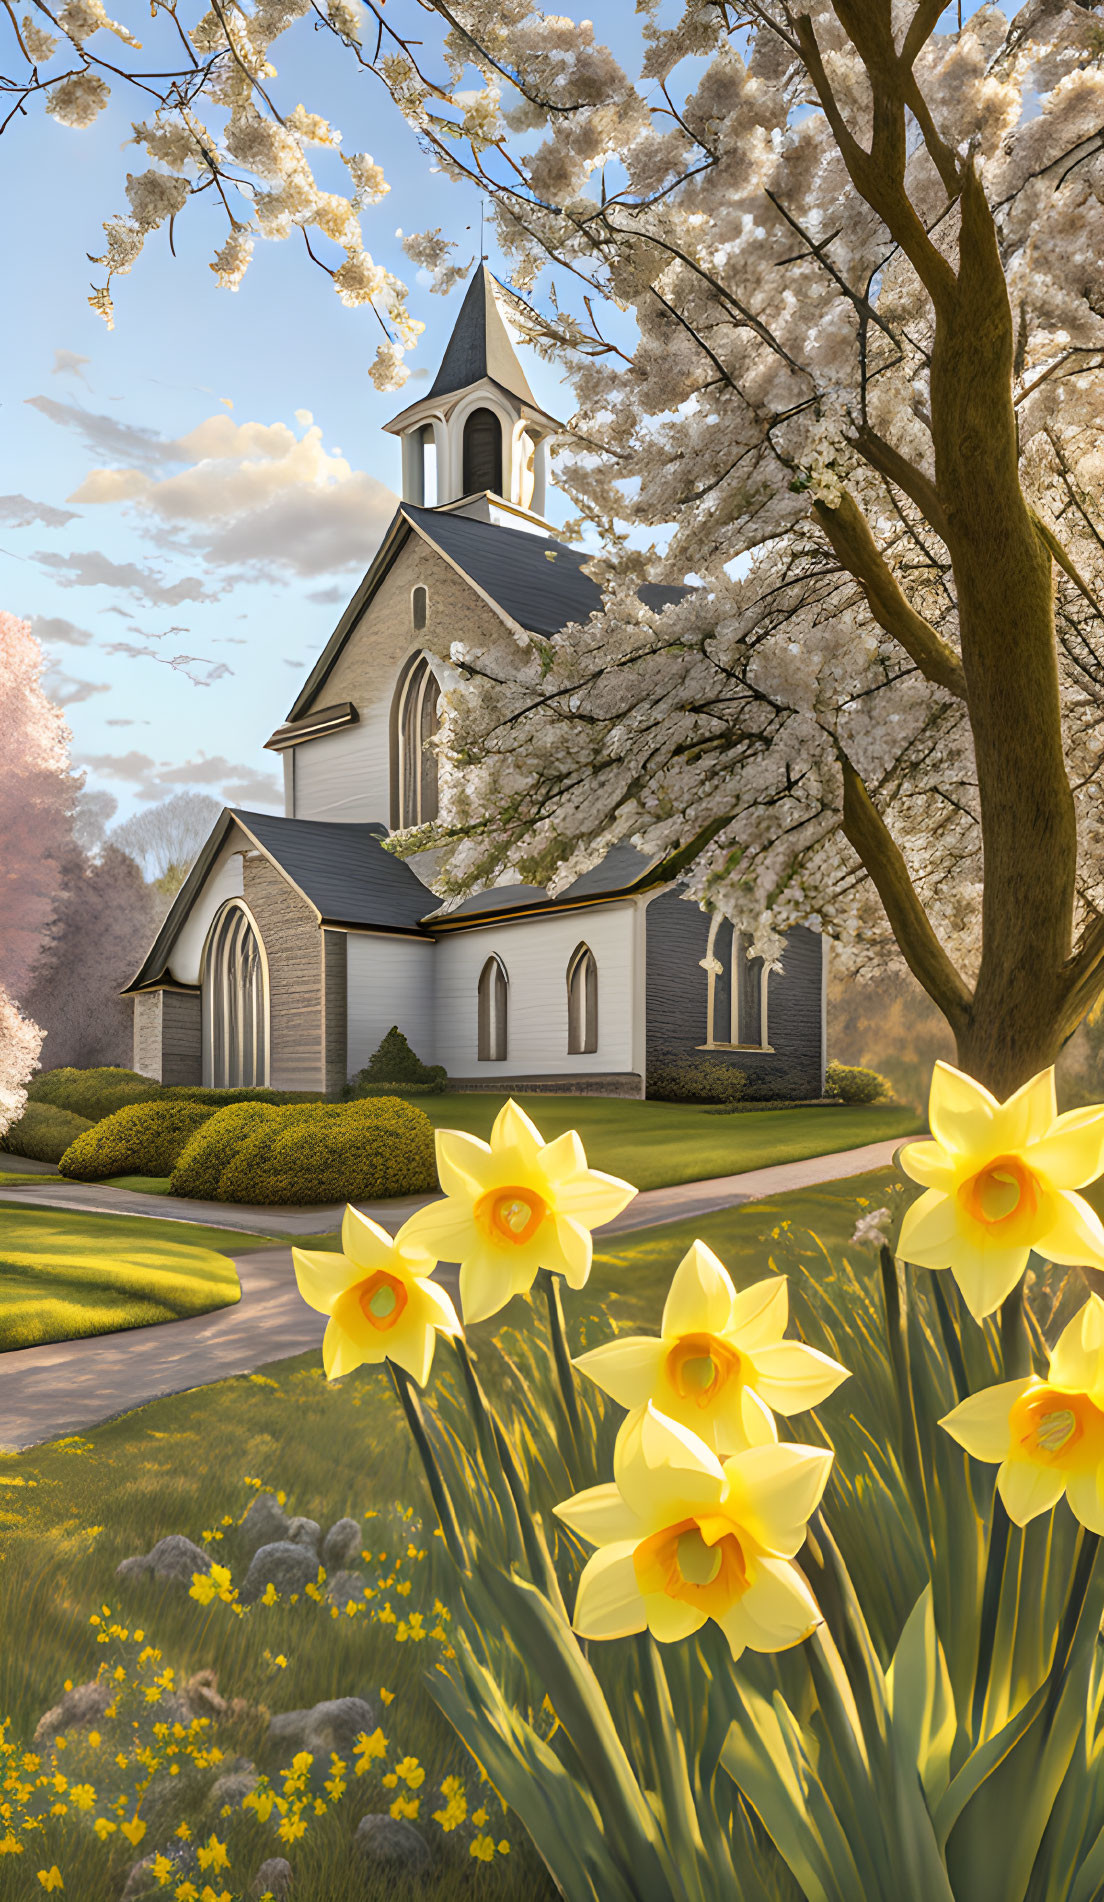 Charming church with blooming trees and daffodils